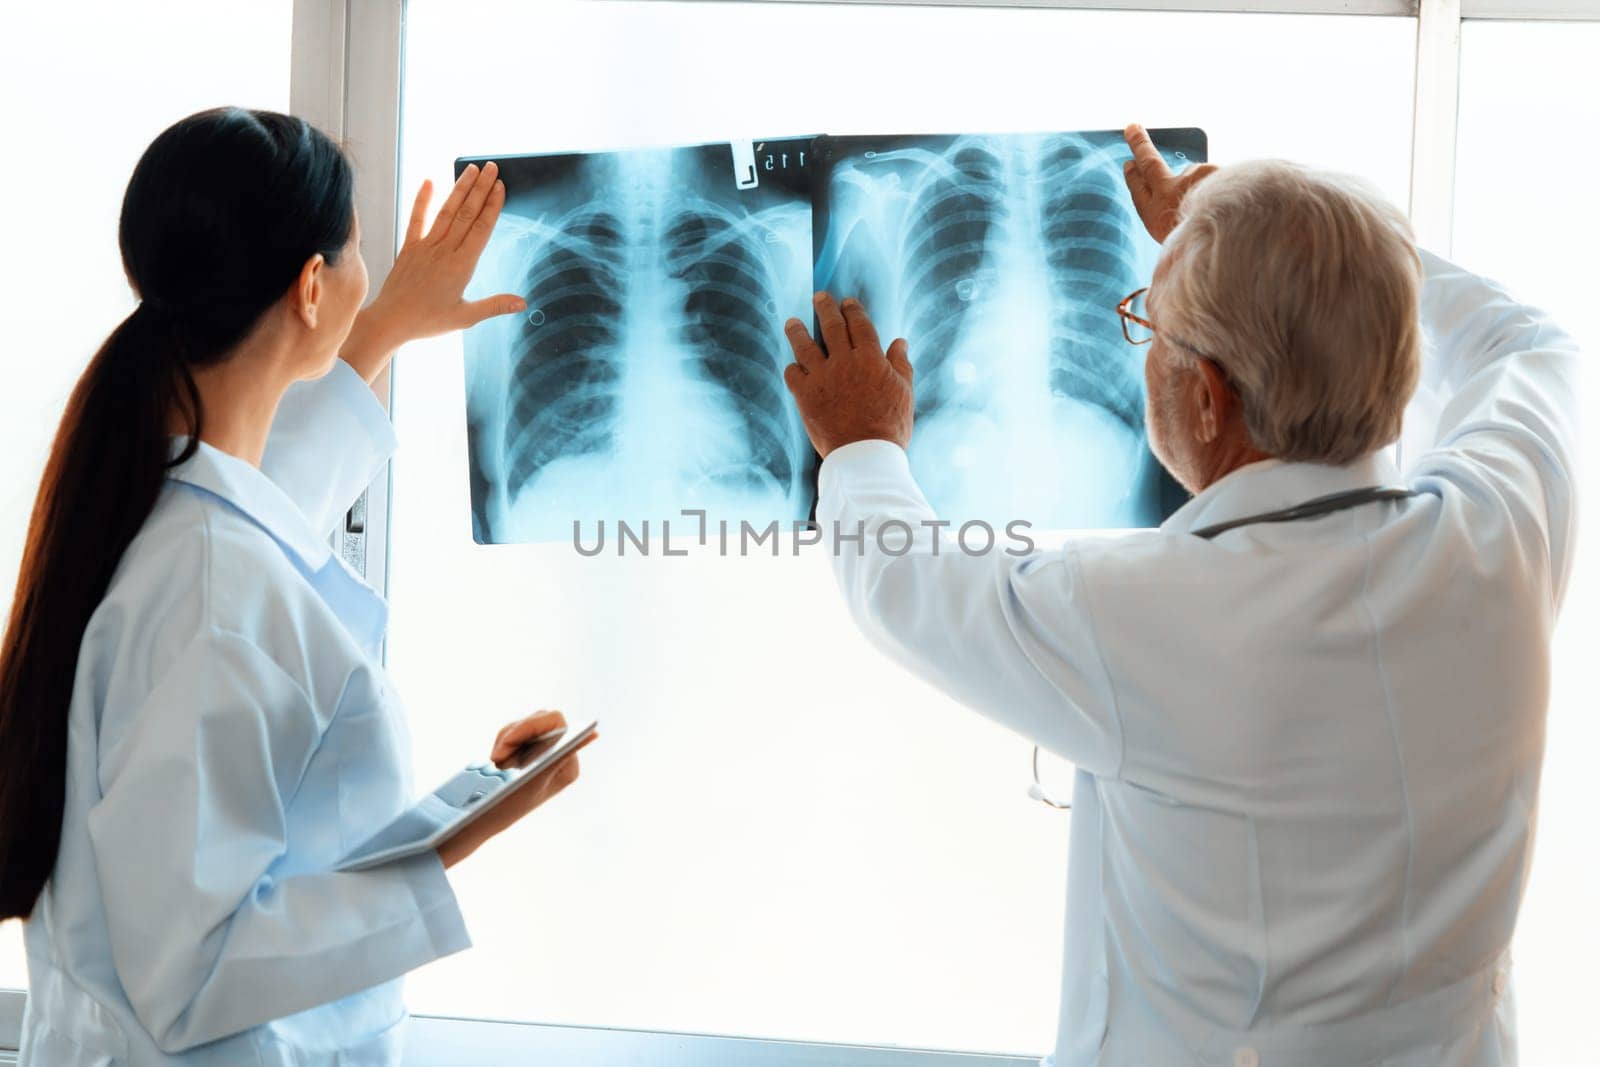 In a hospital sterile room, two professional radiographers hold and examine a radiograph for medical xray diagnosis. Novice doctor seeks advice on a patient's condition from experienced older doctor.